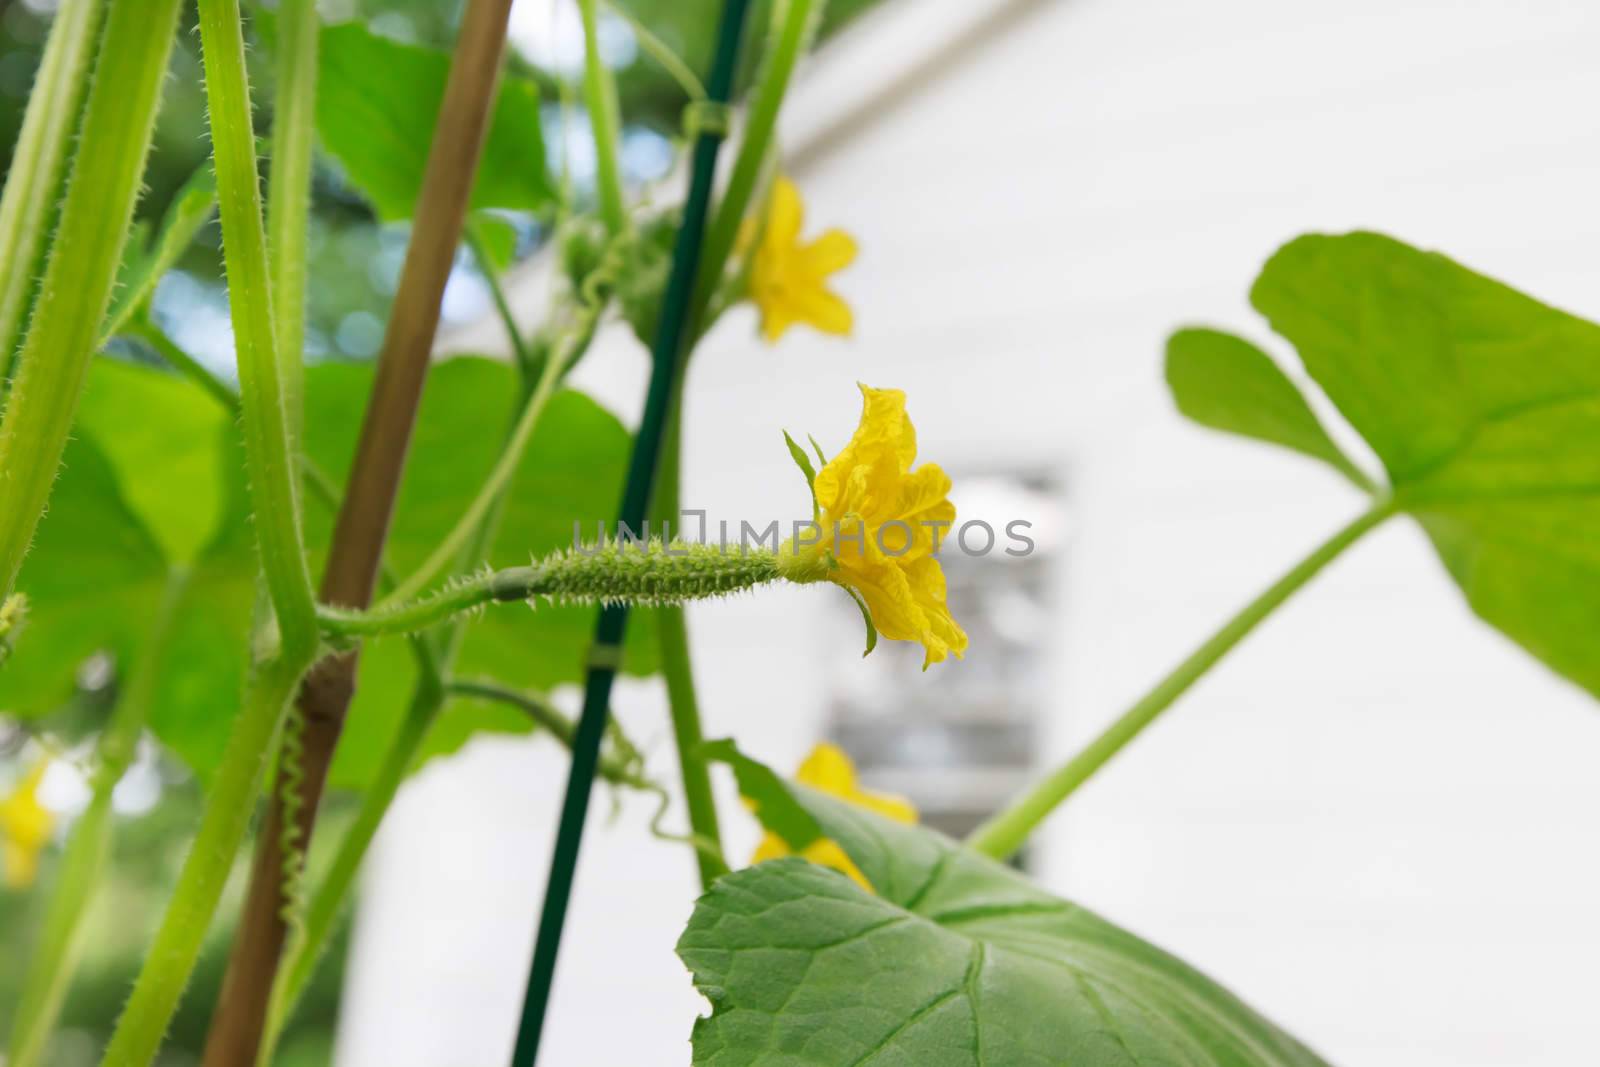 Young cucumber with flowers in a garden by a house